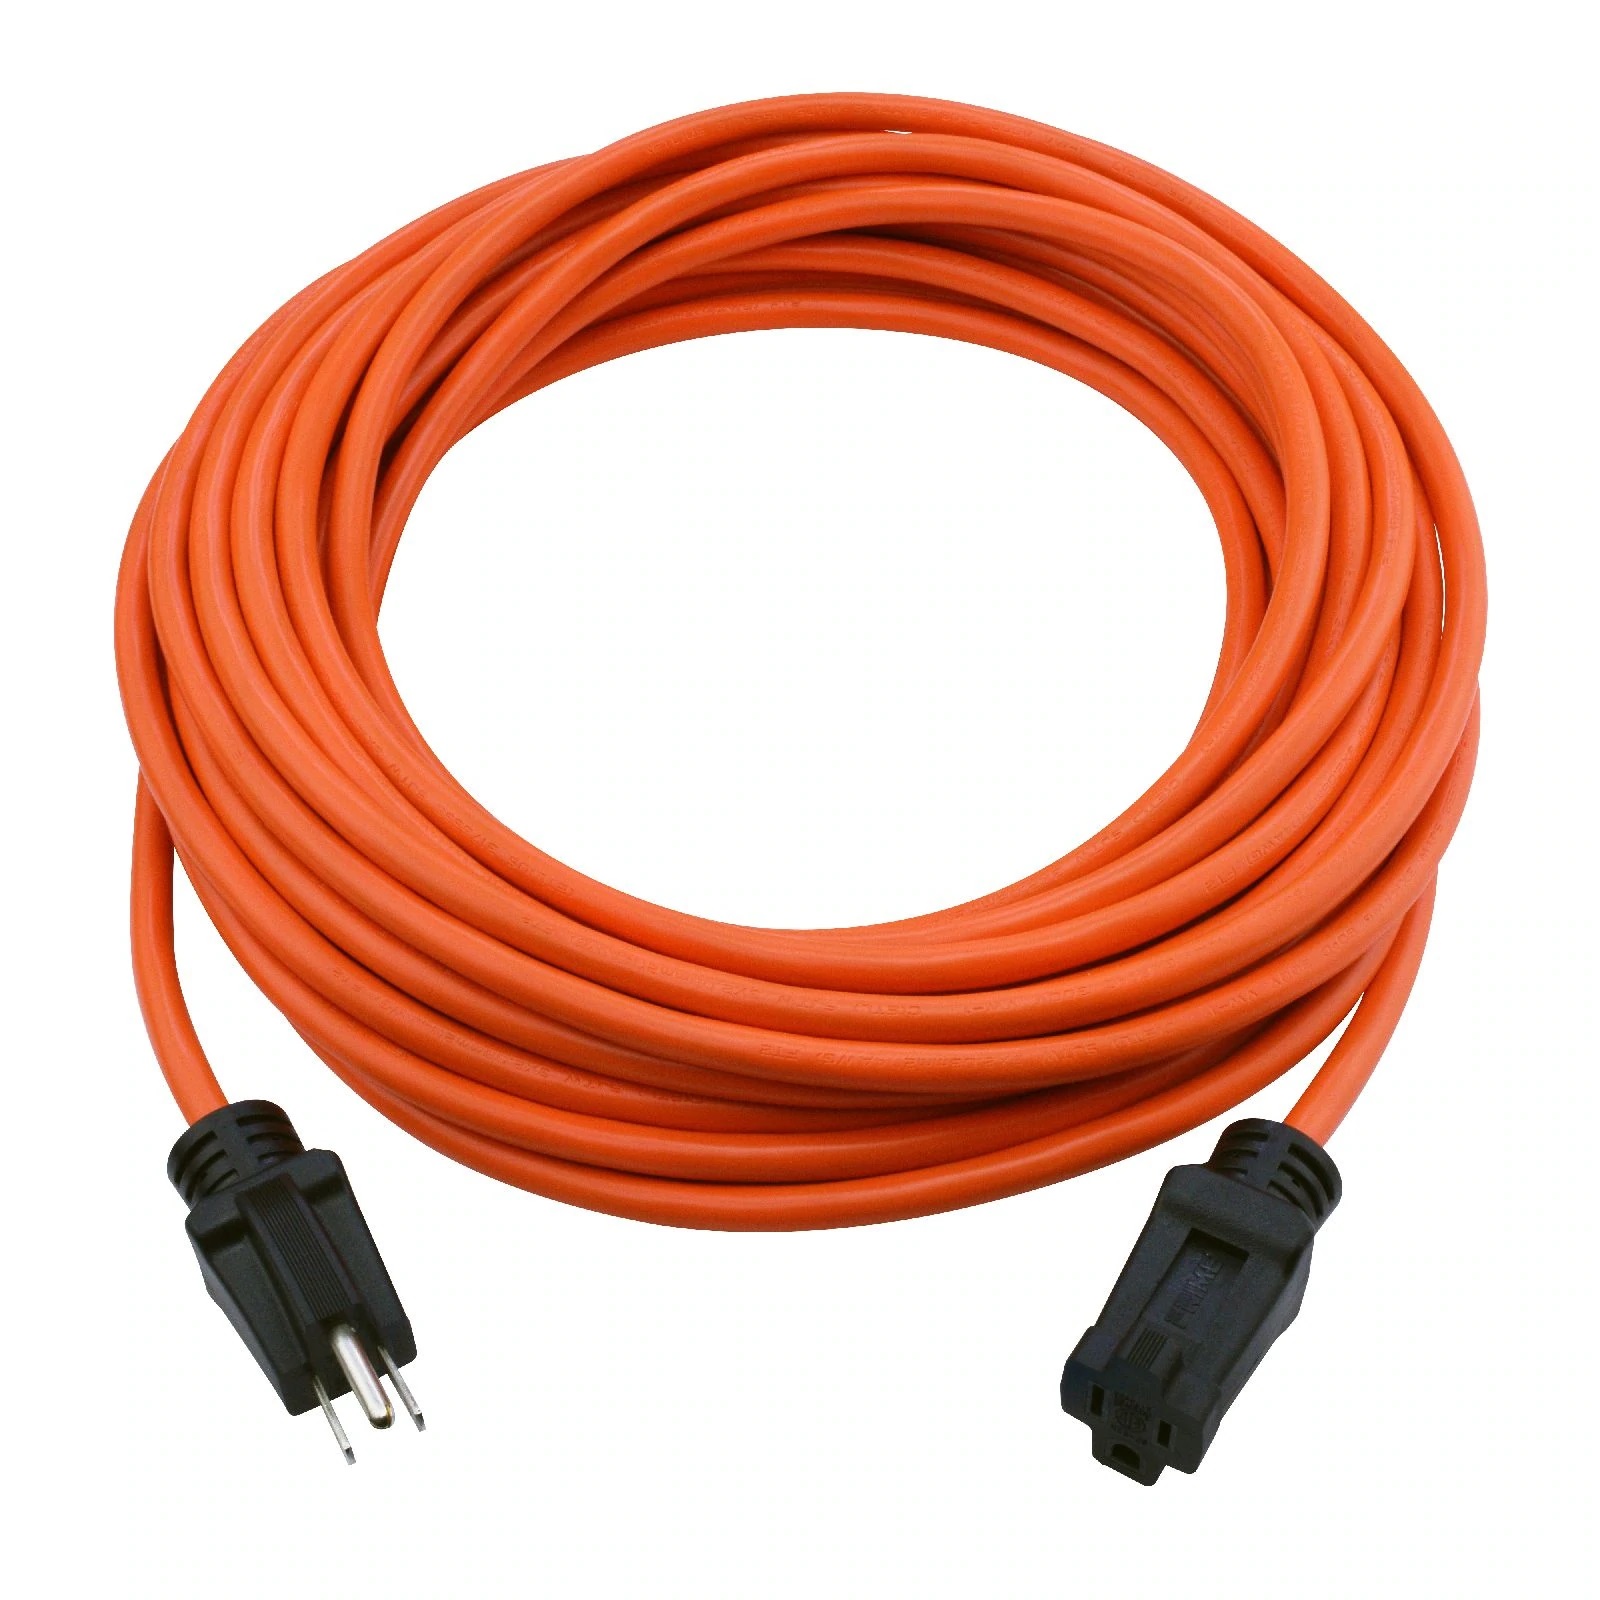 Prime Wire & Cable 50 Foot 14/3 SJTW Outdoor Extension Cord from Columbia Safety